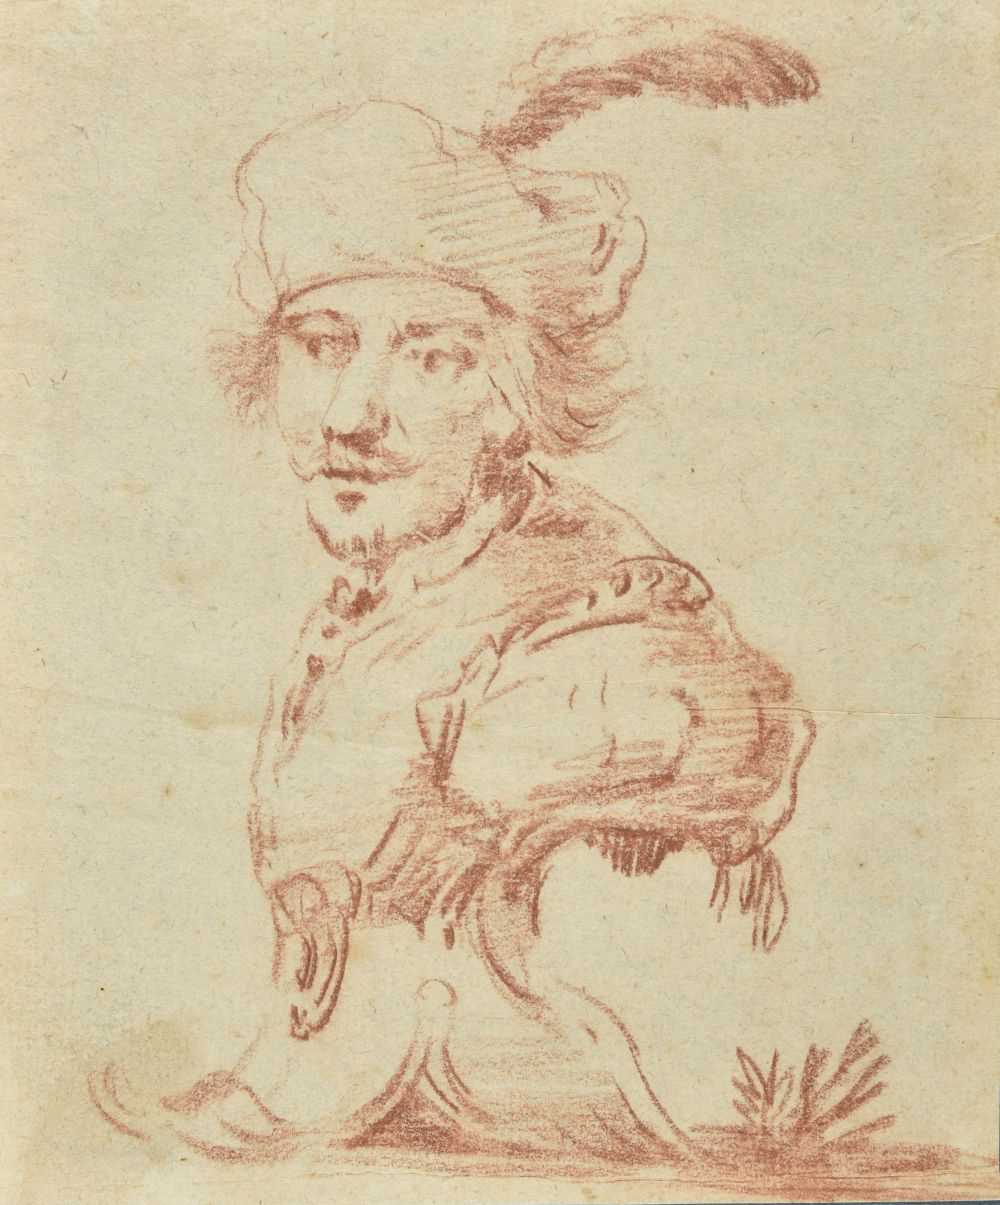 Lot 281 - Attributed to Cornelis Troost (1697-1750). Design for a sculpted bust of a man with plumed hat